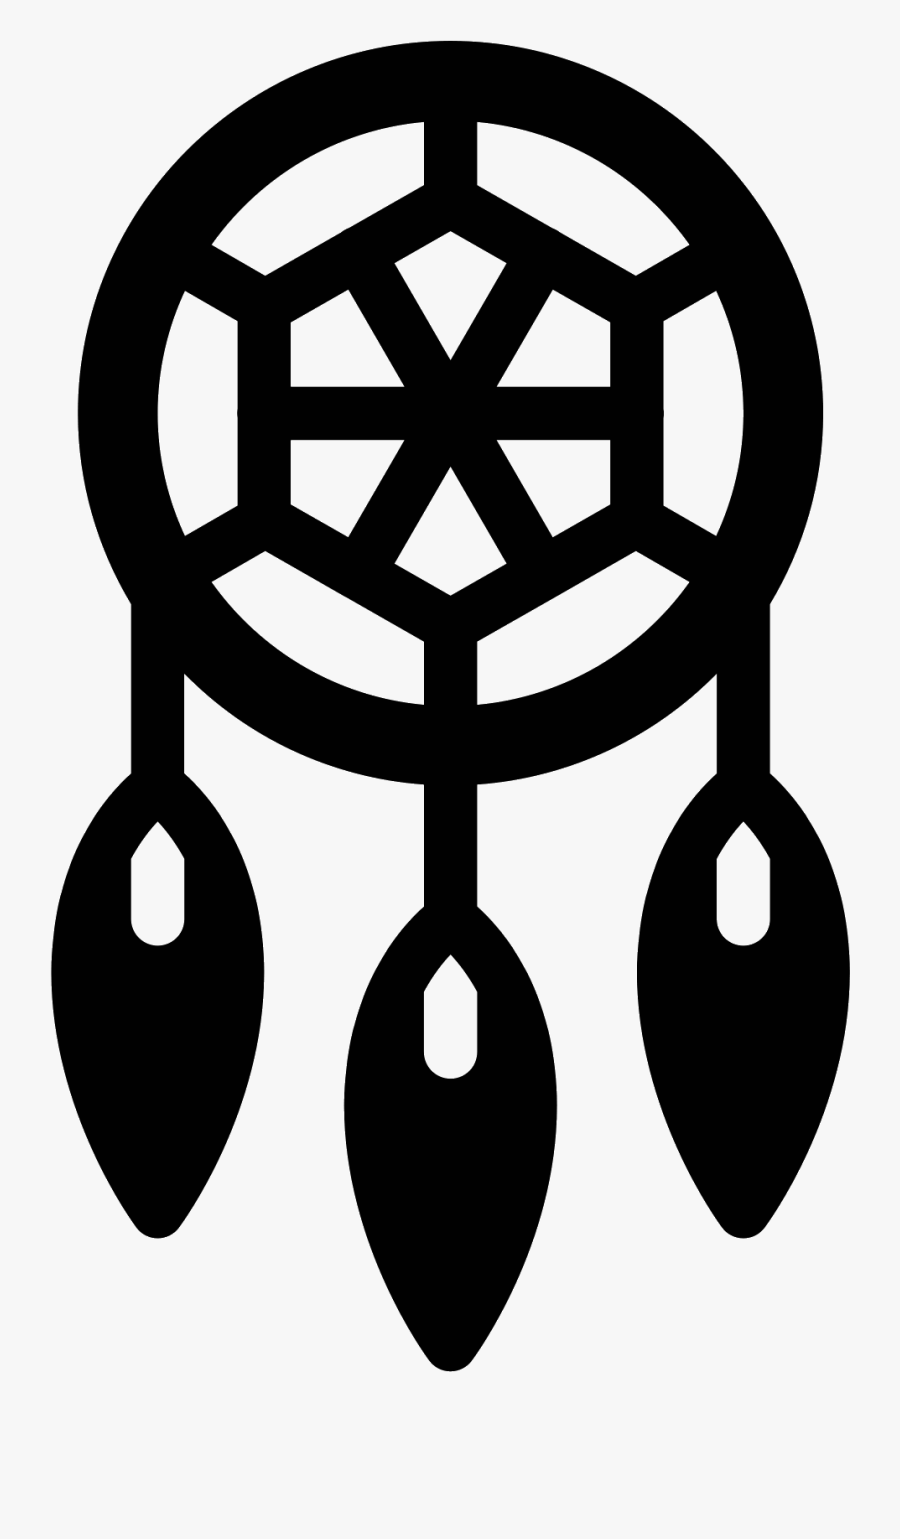 Filled Icon Free Download - Icon Dream Catcher Png, Transparent Clipart